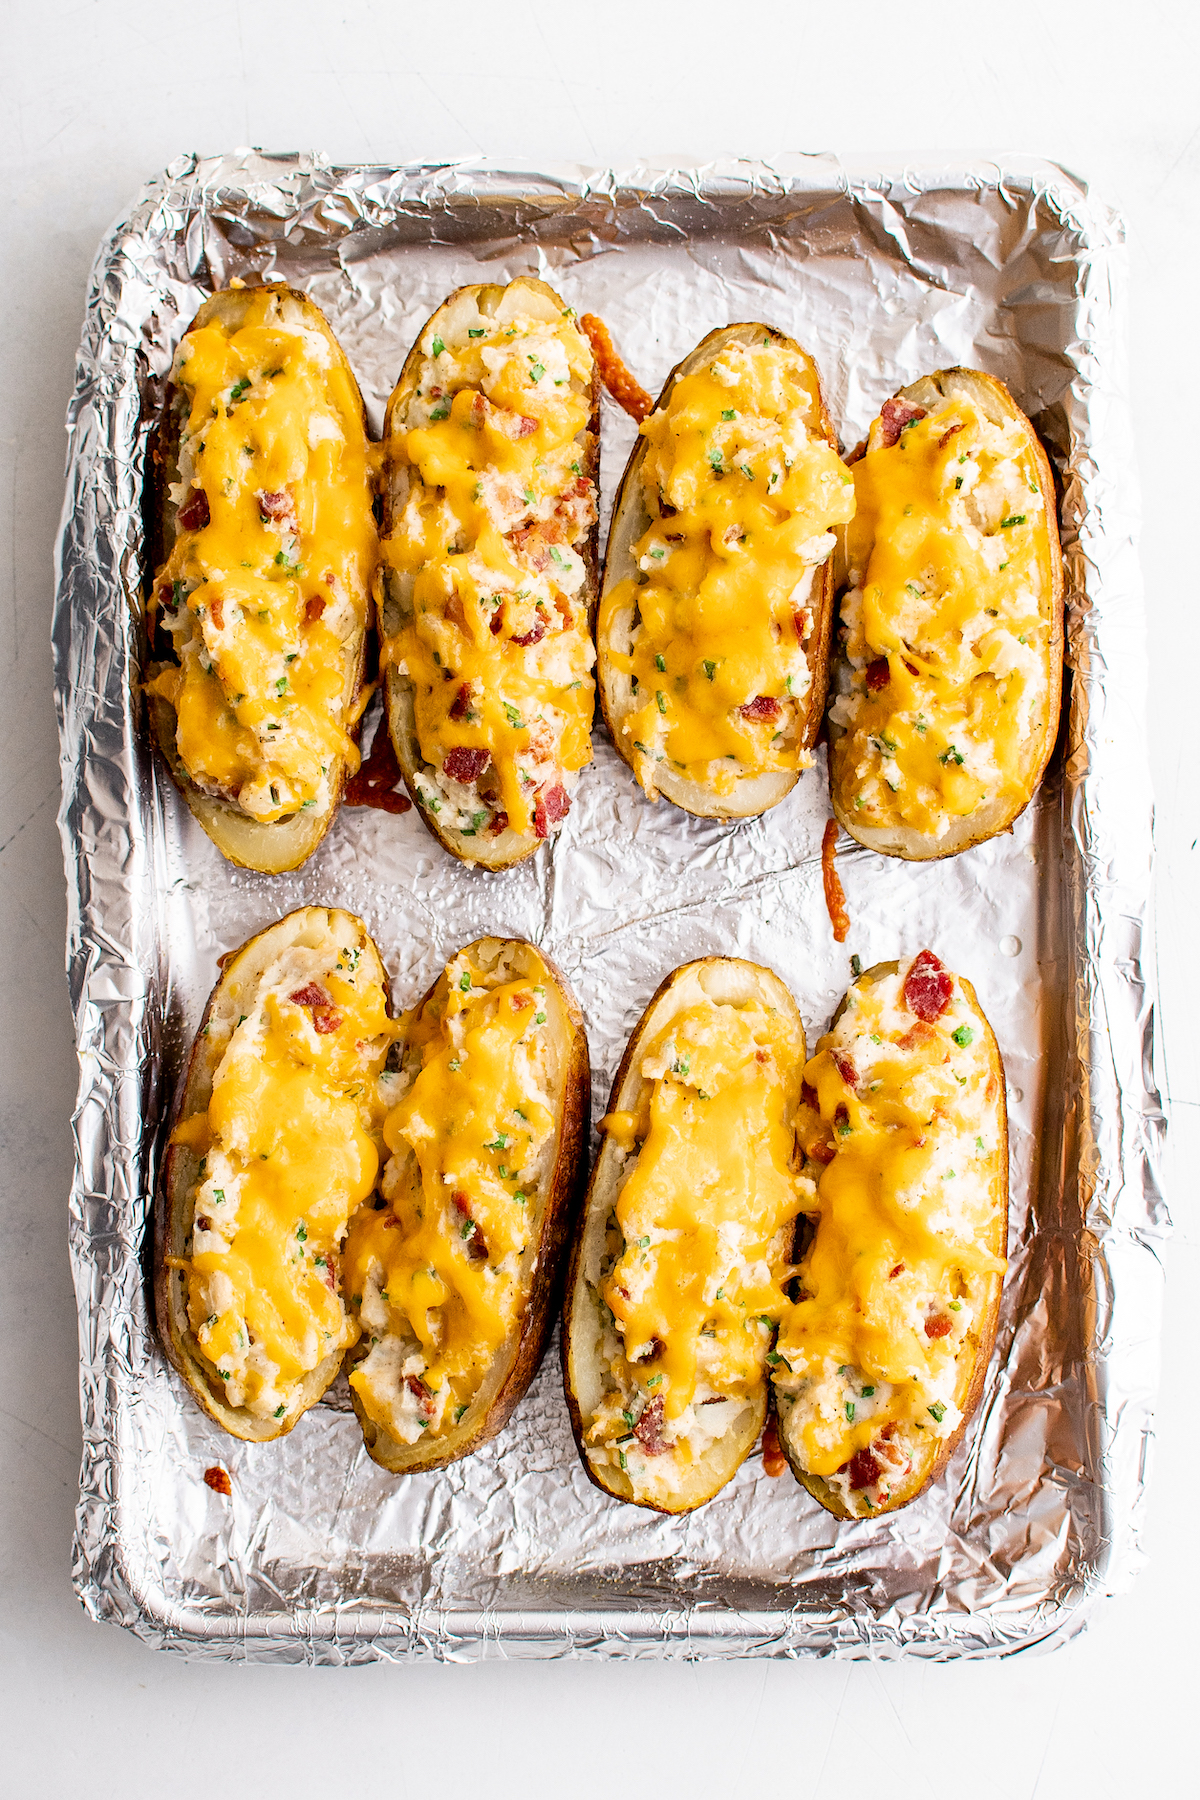 Stuffed potatoes topped with melted cheese.